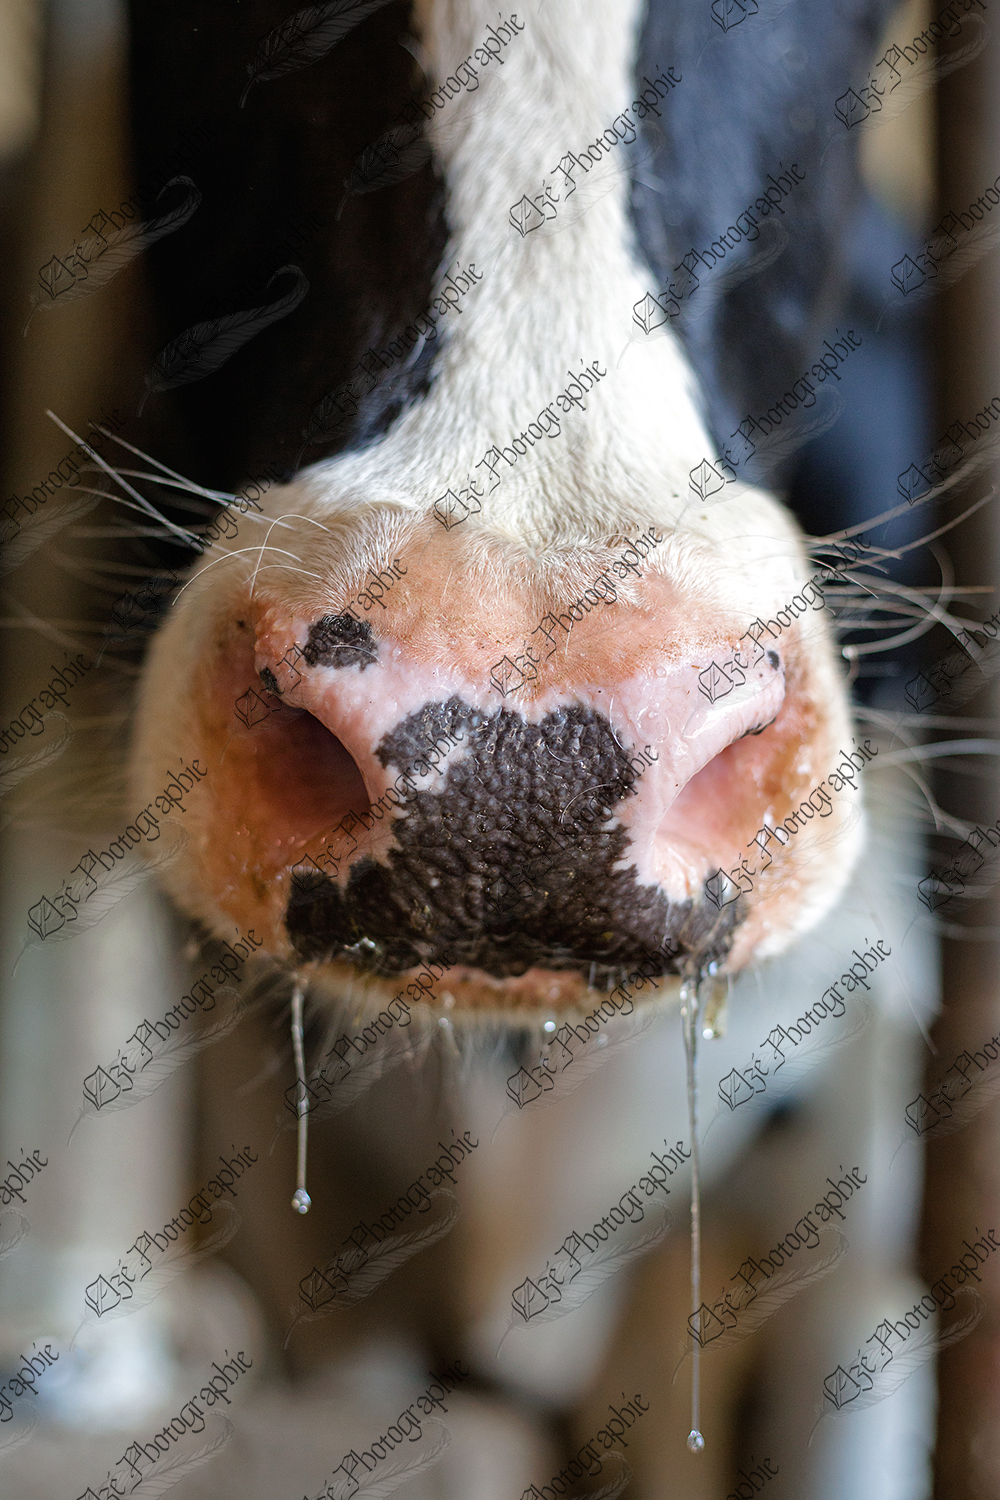 elze_photo_8615_museau_humide_salive_nose_dairy_cow